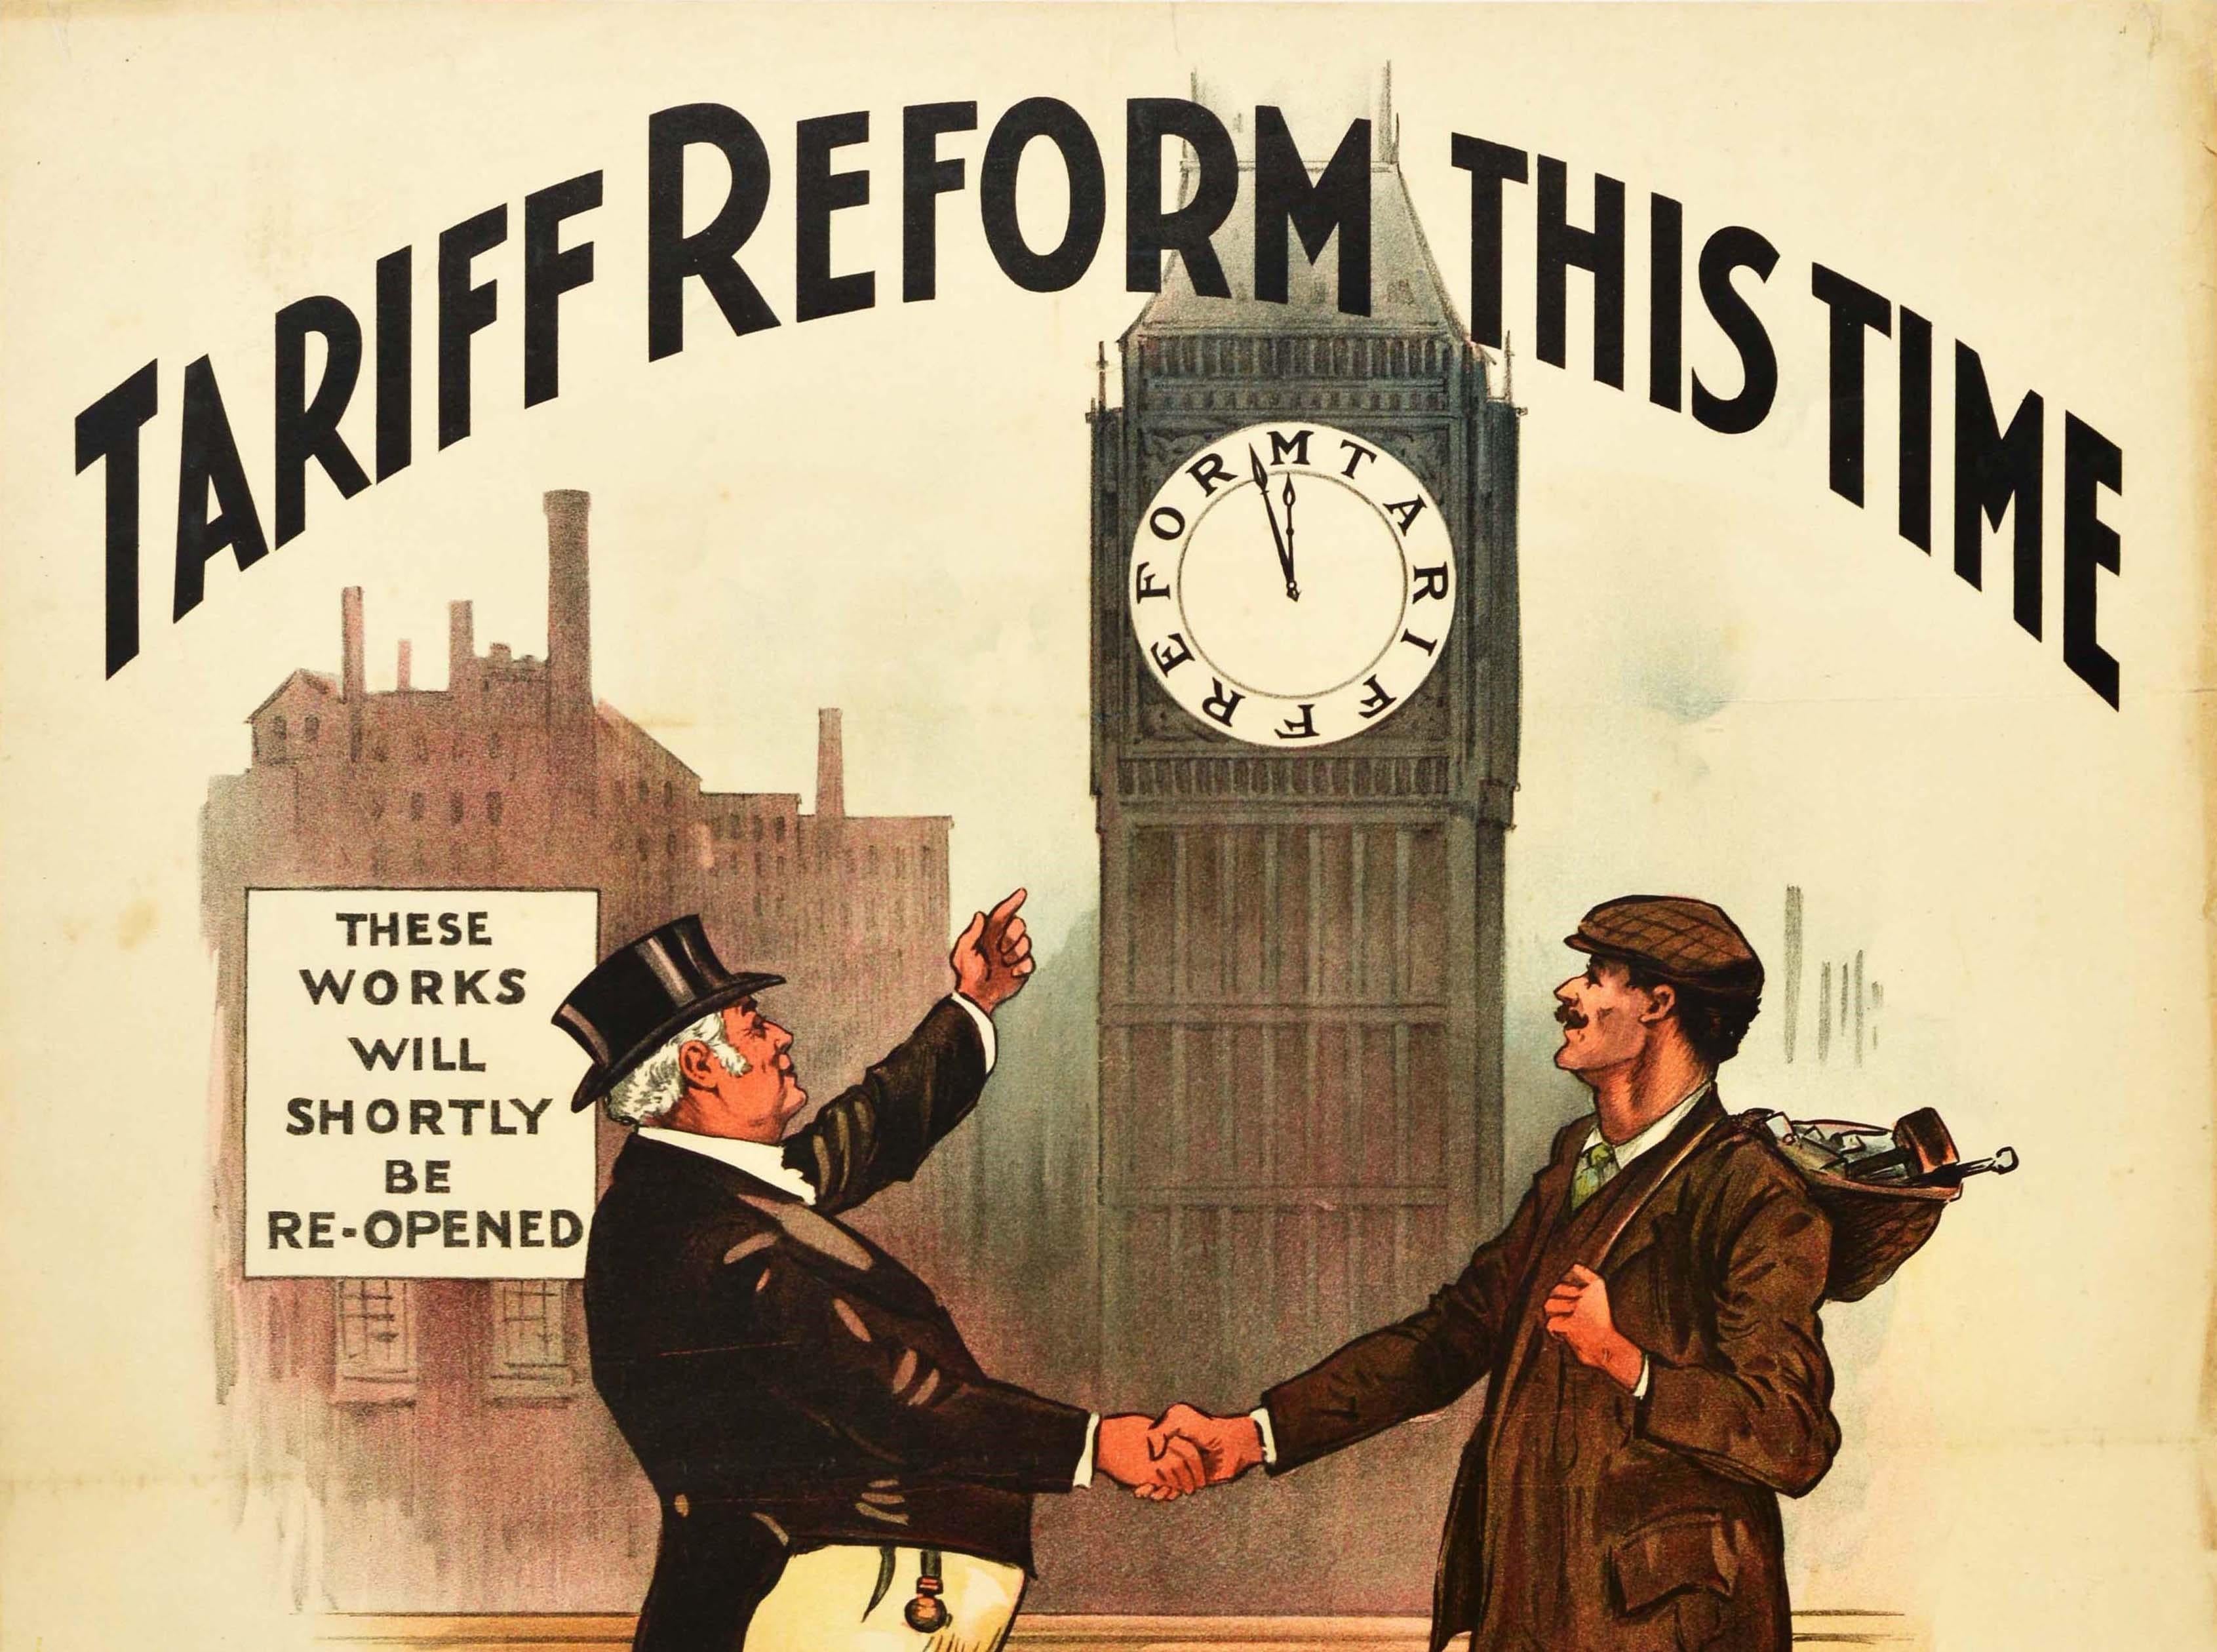 Original antique political election propaganda poster - Tariff Reform This Time - featuring an illustration on the Thames Embankment showing John Bull wearing a top hat and tails and shaking hands with a worker carrying a bag full of handyman tools